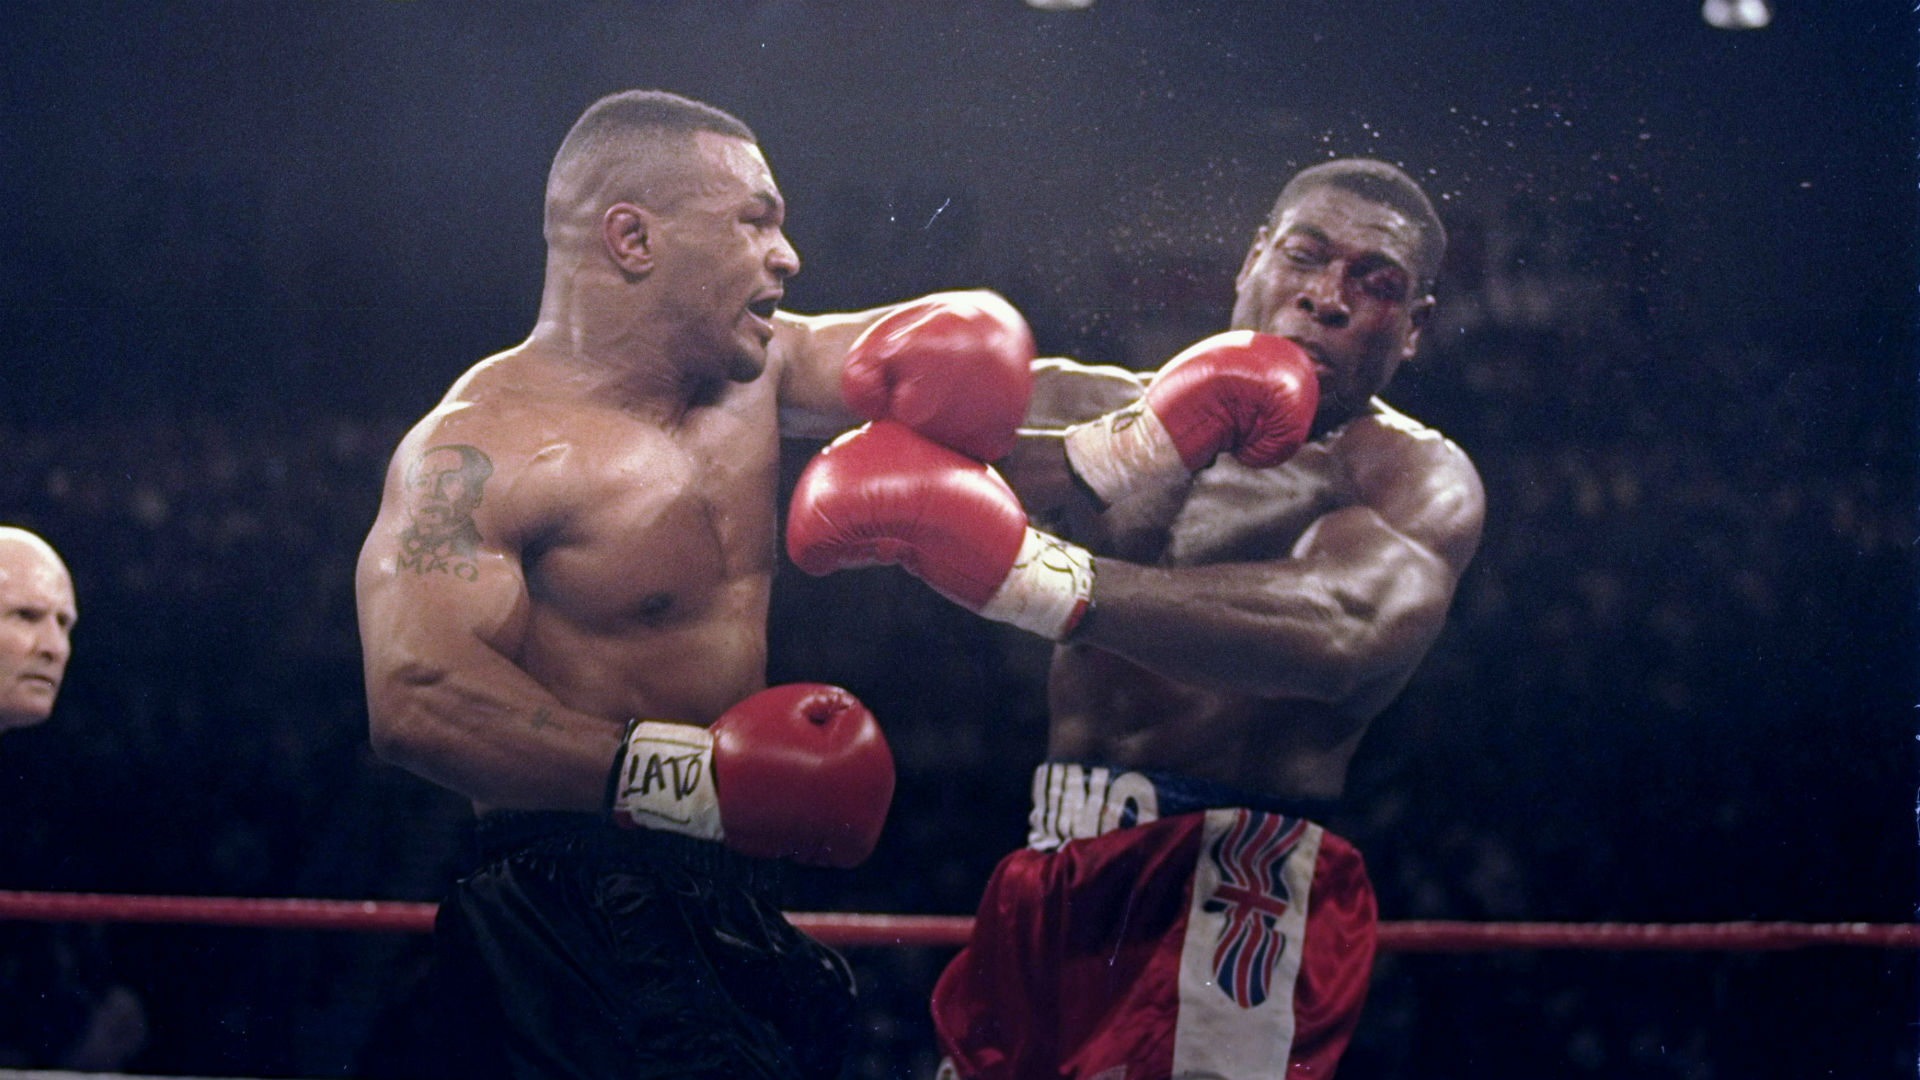 Here are Mike Tyson's 10 most memorable fights, from Evander Holyfield to Buster Douglas